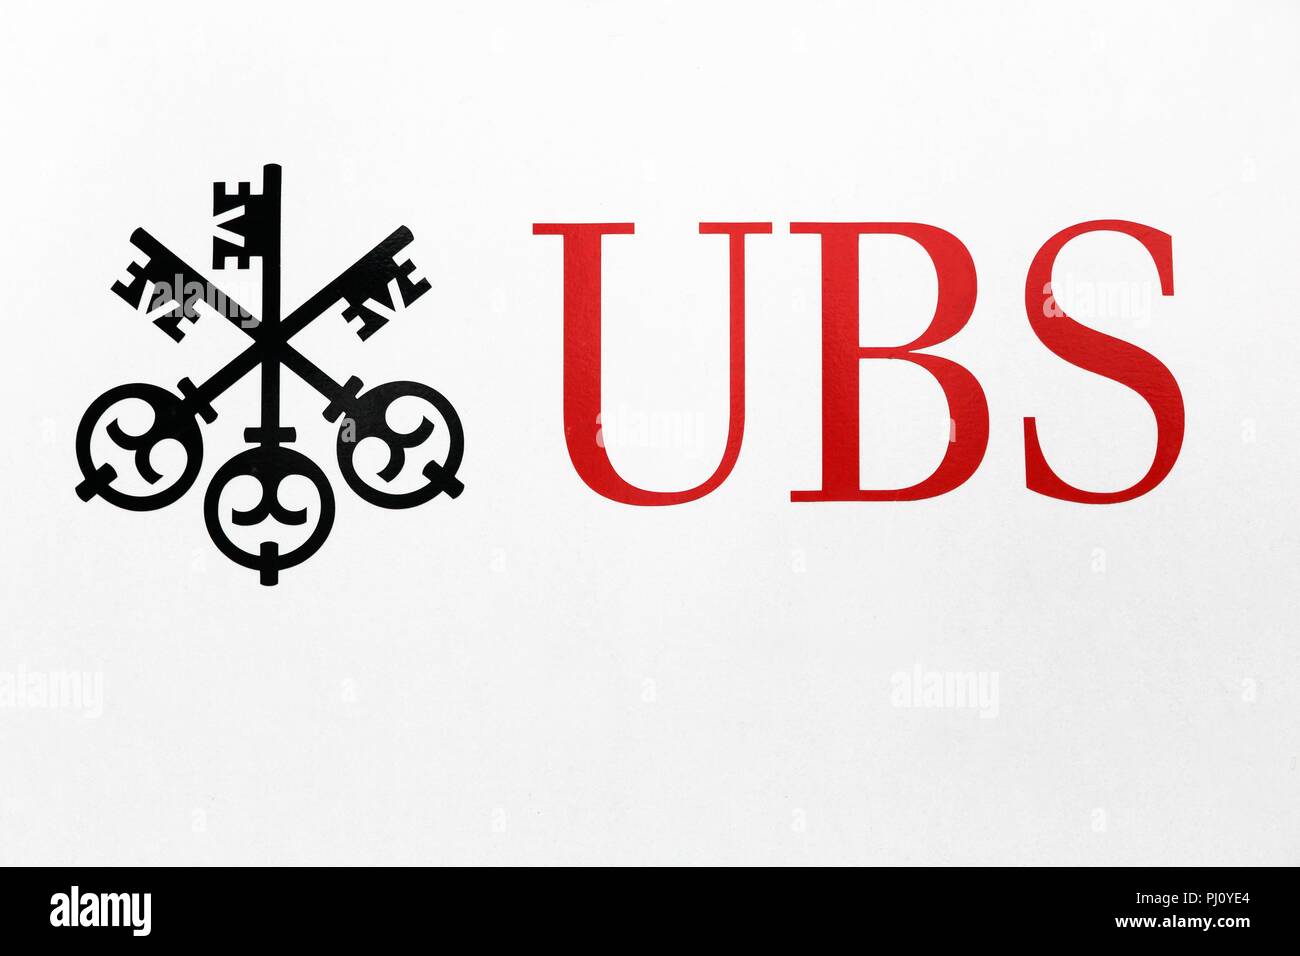 Kirchberg, Luxembourg - July 1, 2017: UBS sign on a wall. UBS is a Swiss global financial services company. UBS is the largest bank in Switzerland Stock Photo